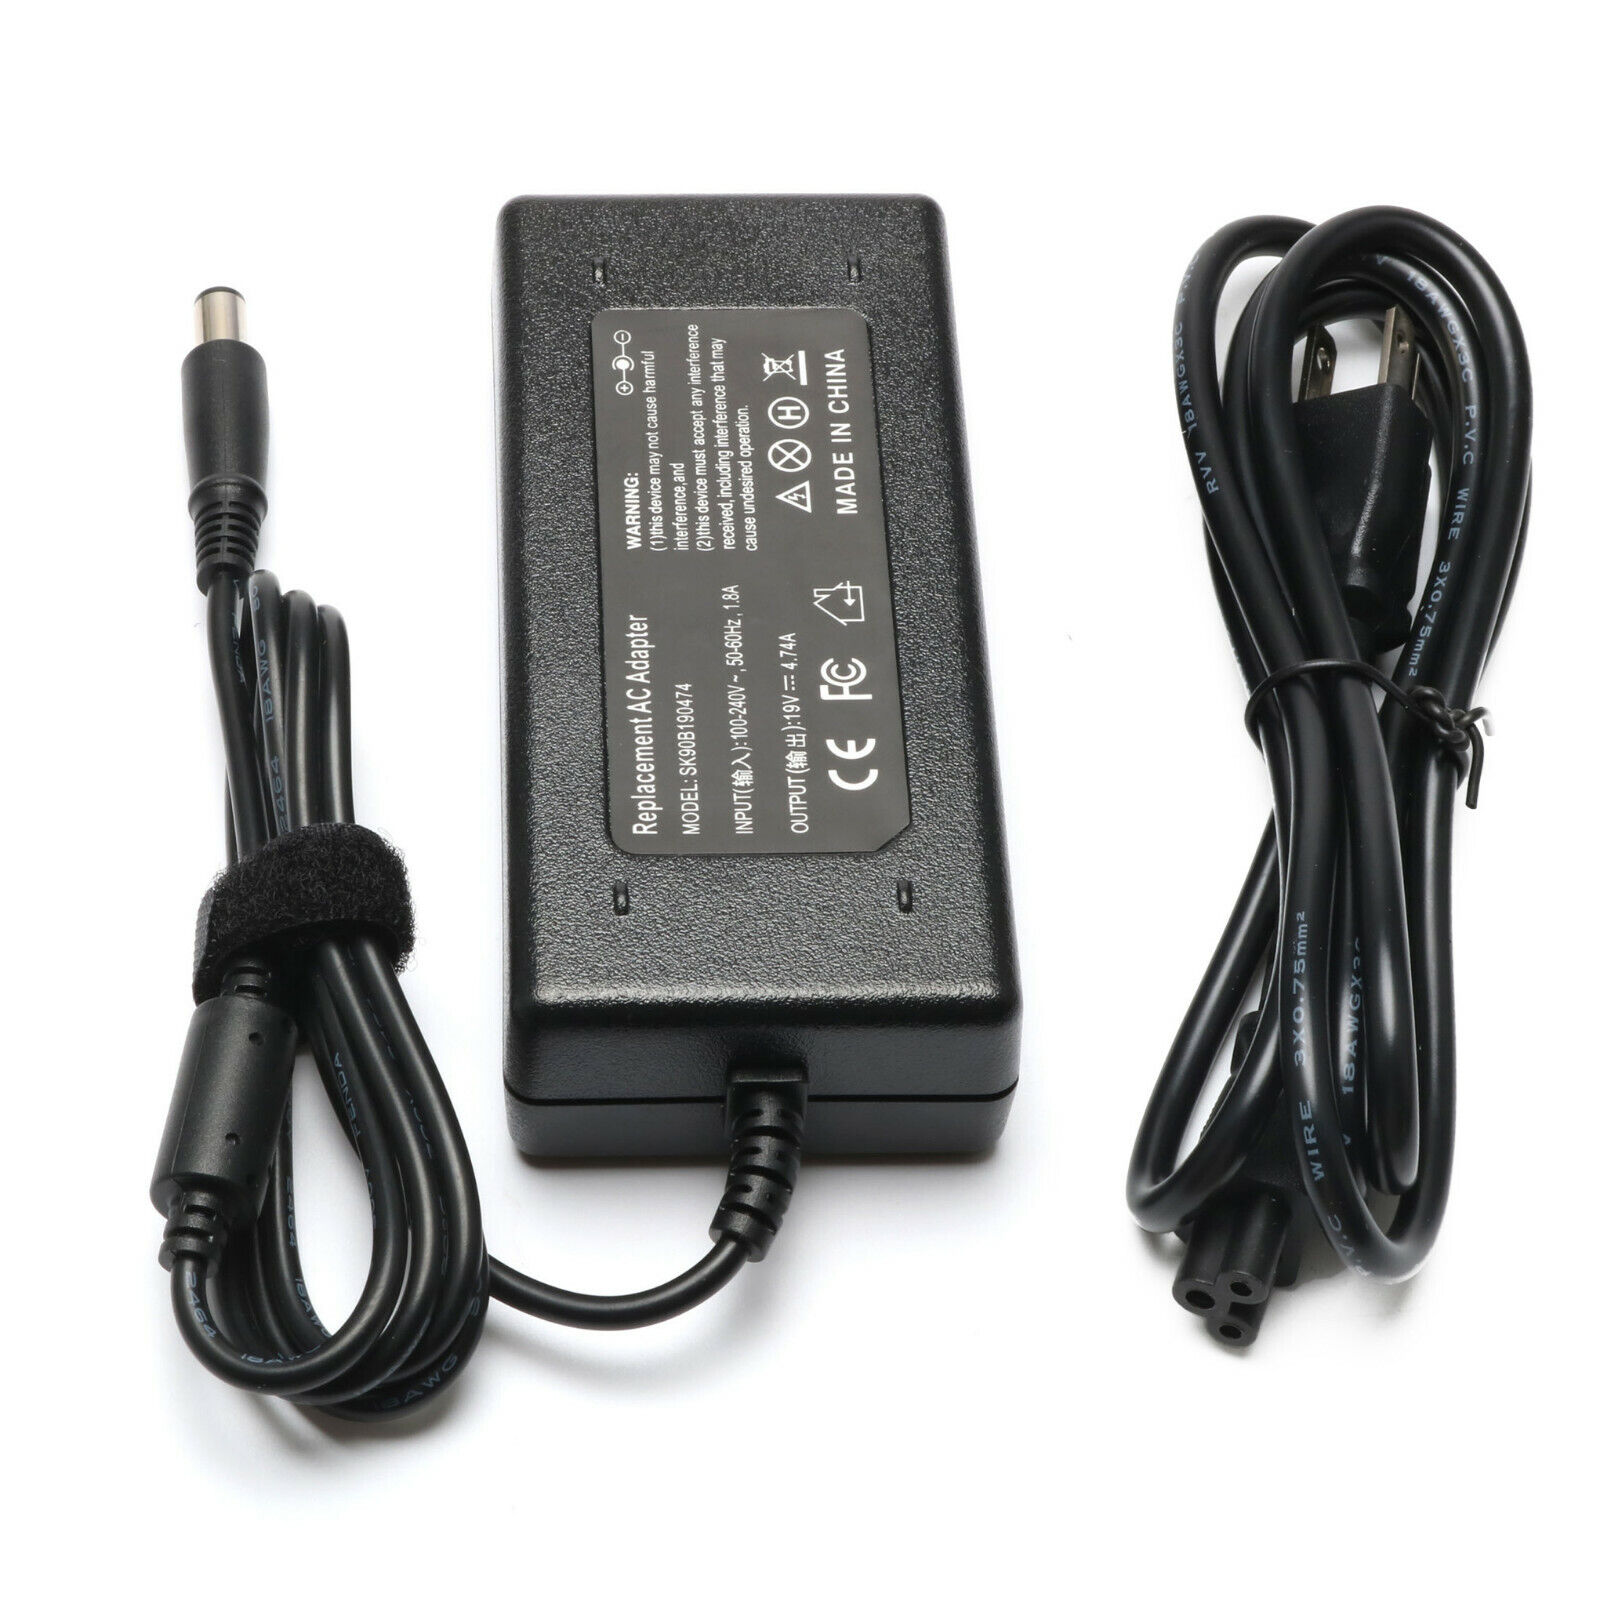 AC Adapter for HP Compaq nx6325 nx7300 nx7400 Laptop Power Supply Charger New